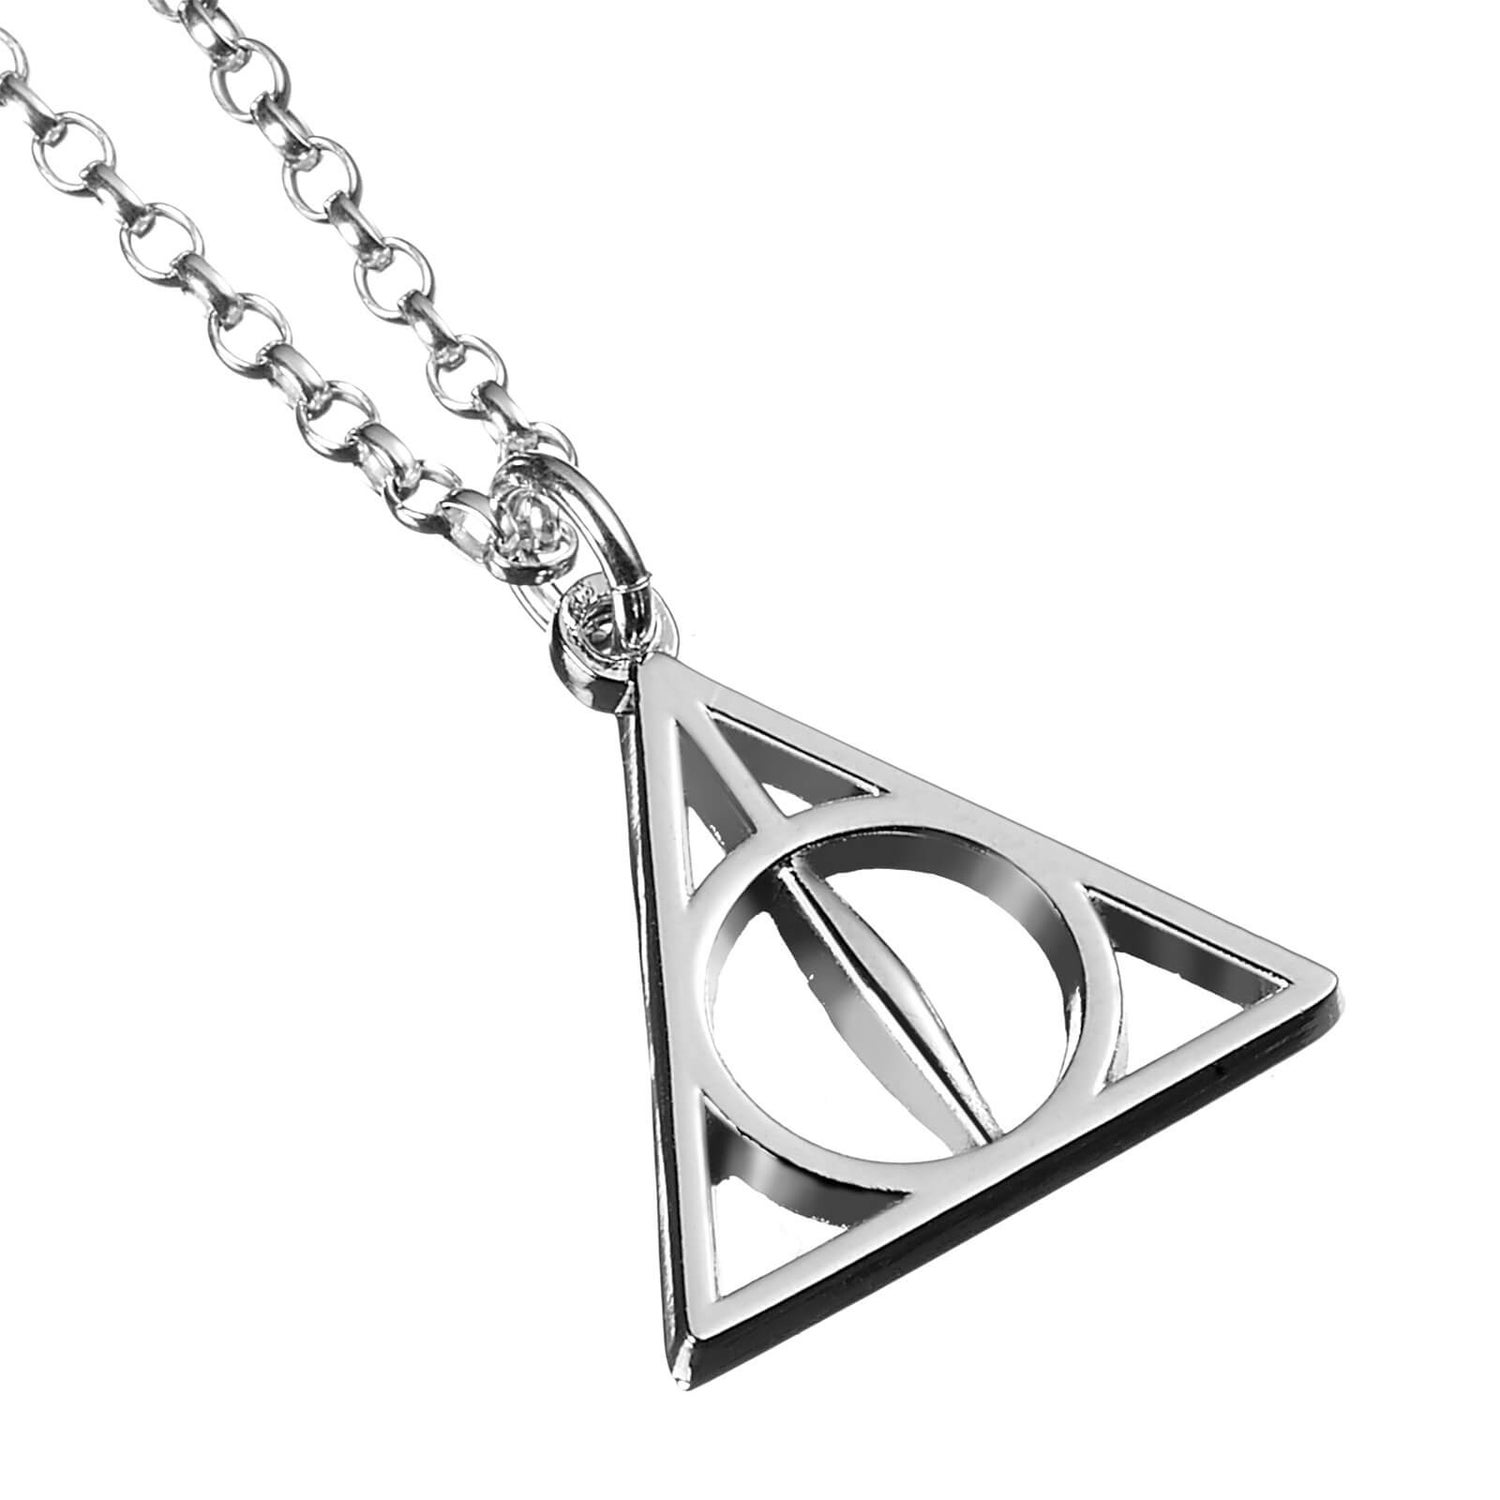 Harry Potter Deathly Hallows Necklace - Sterling Silver